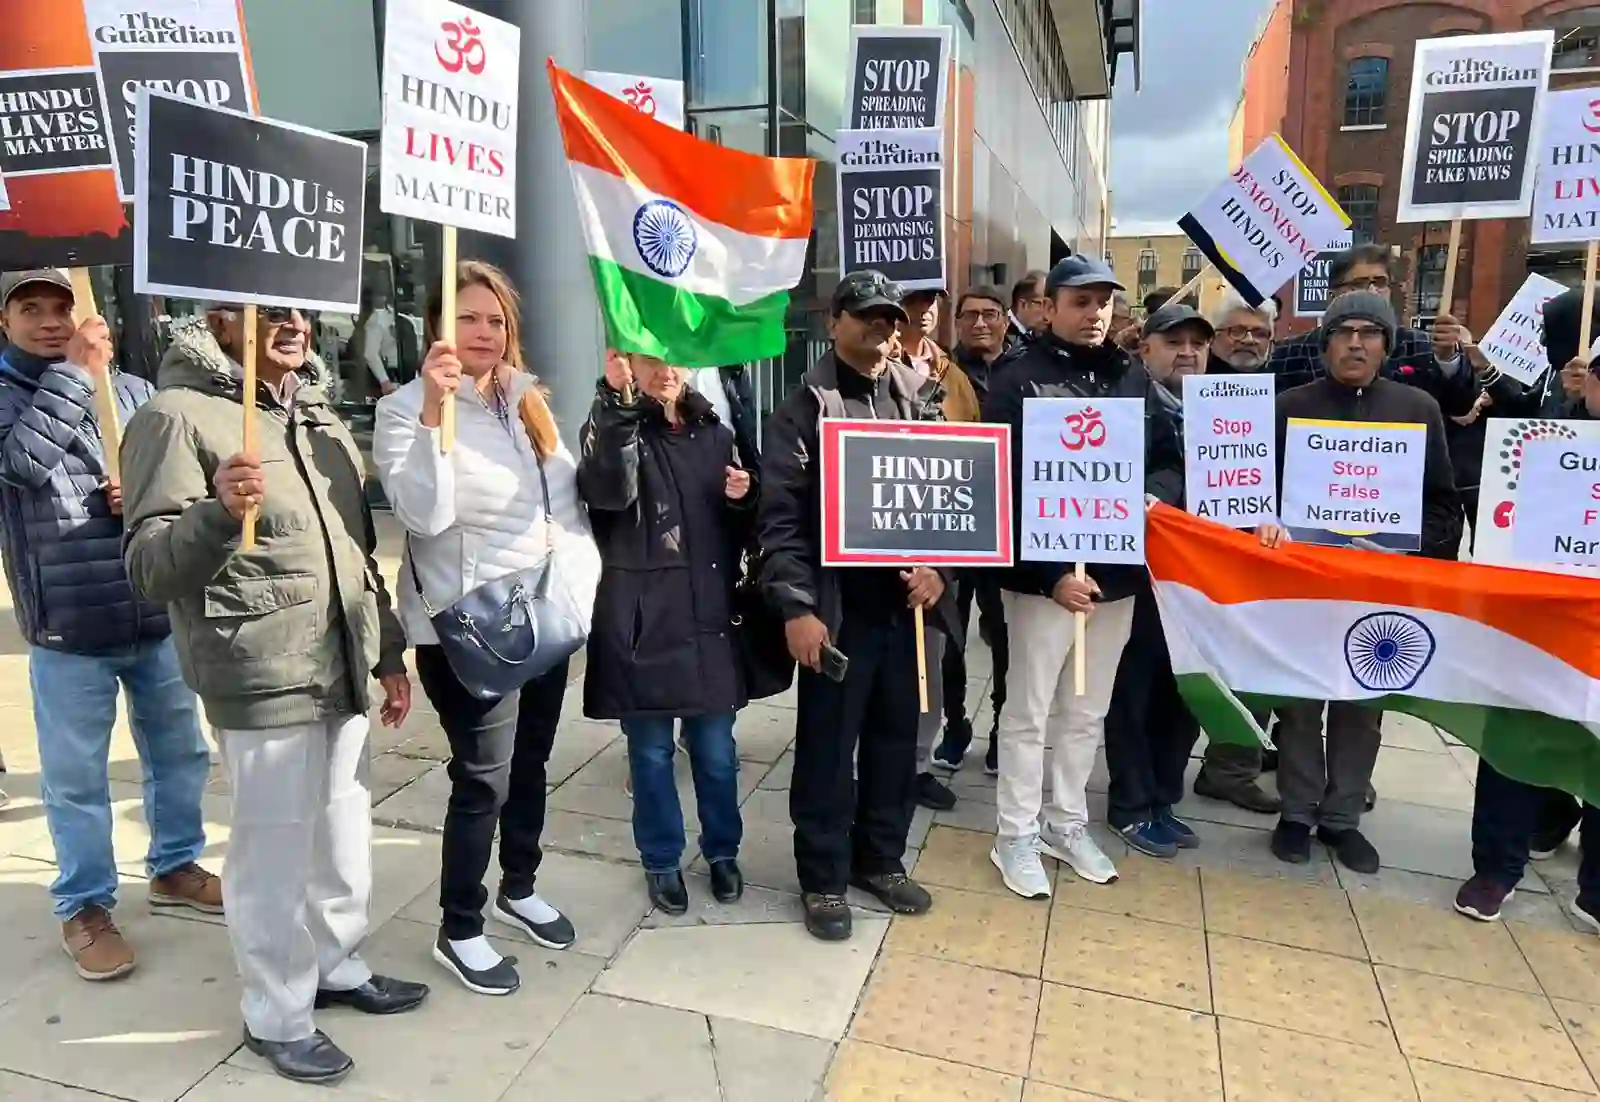 British Hindus protest against The Guardian’s coverage of Leicester incidents